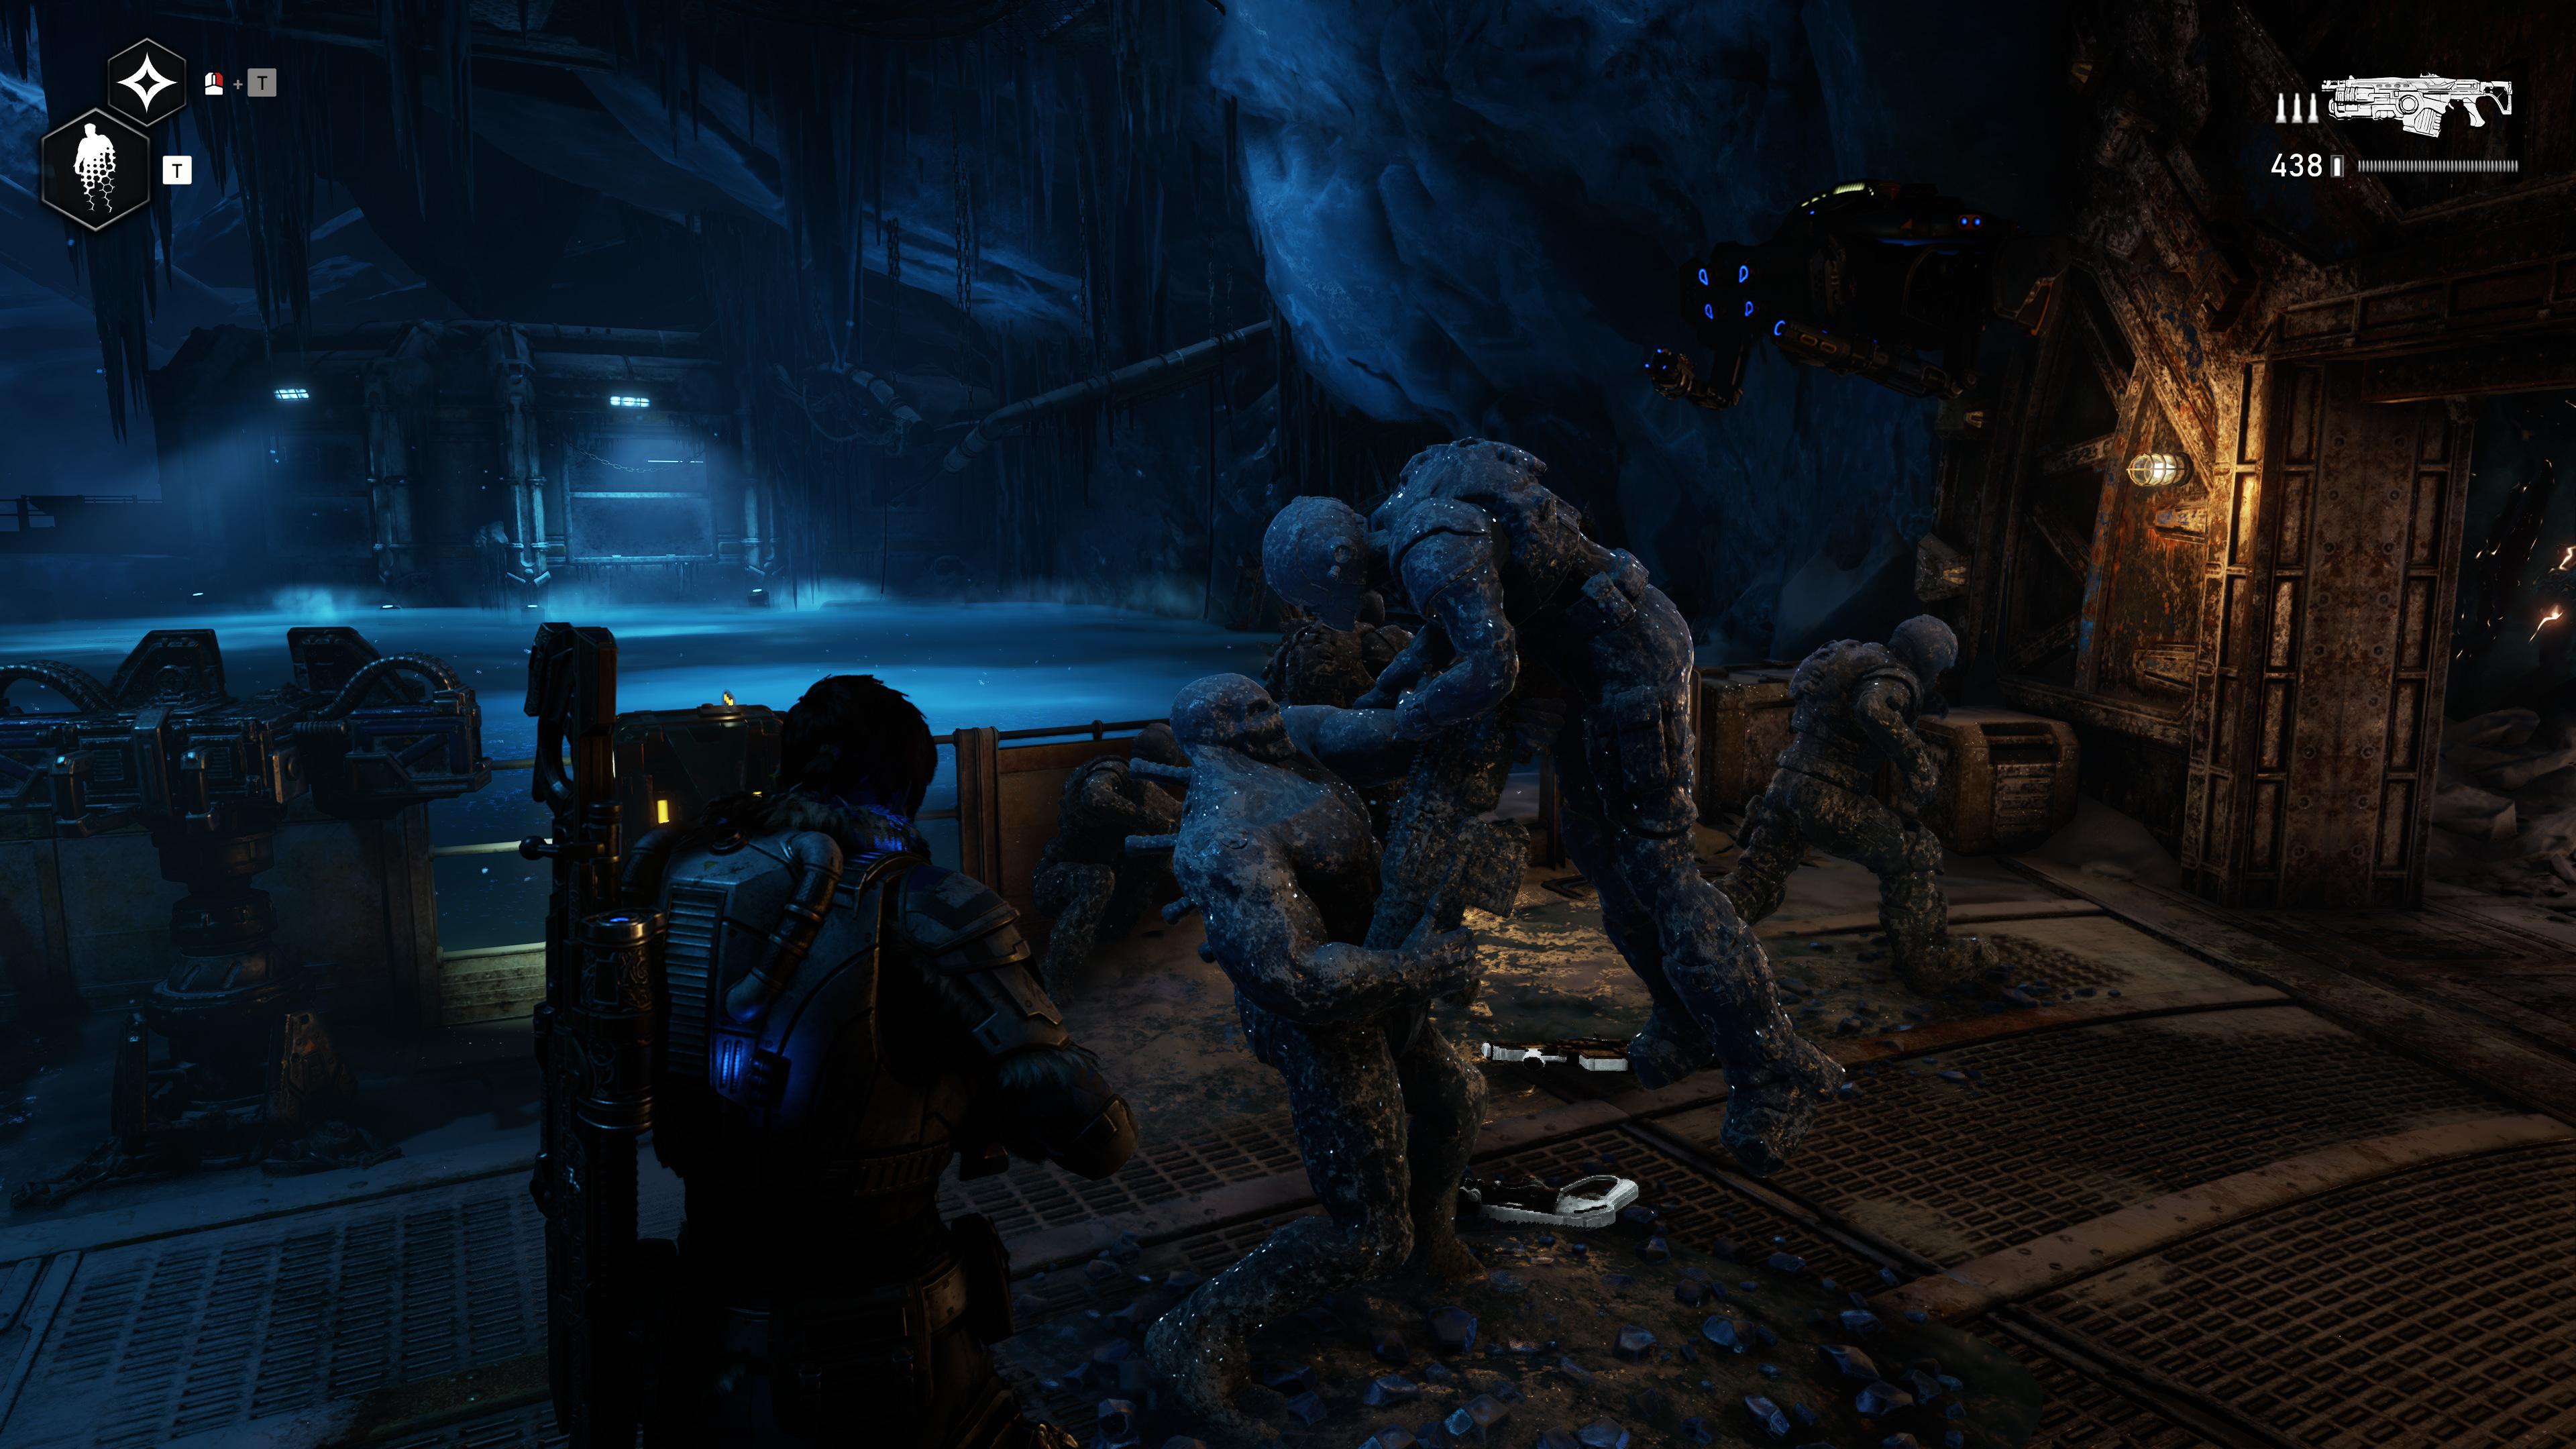 Gears 5 Review –